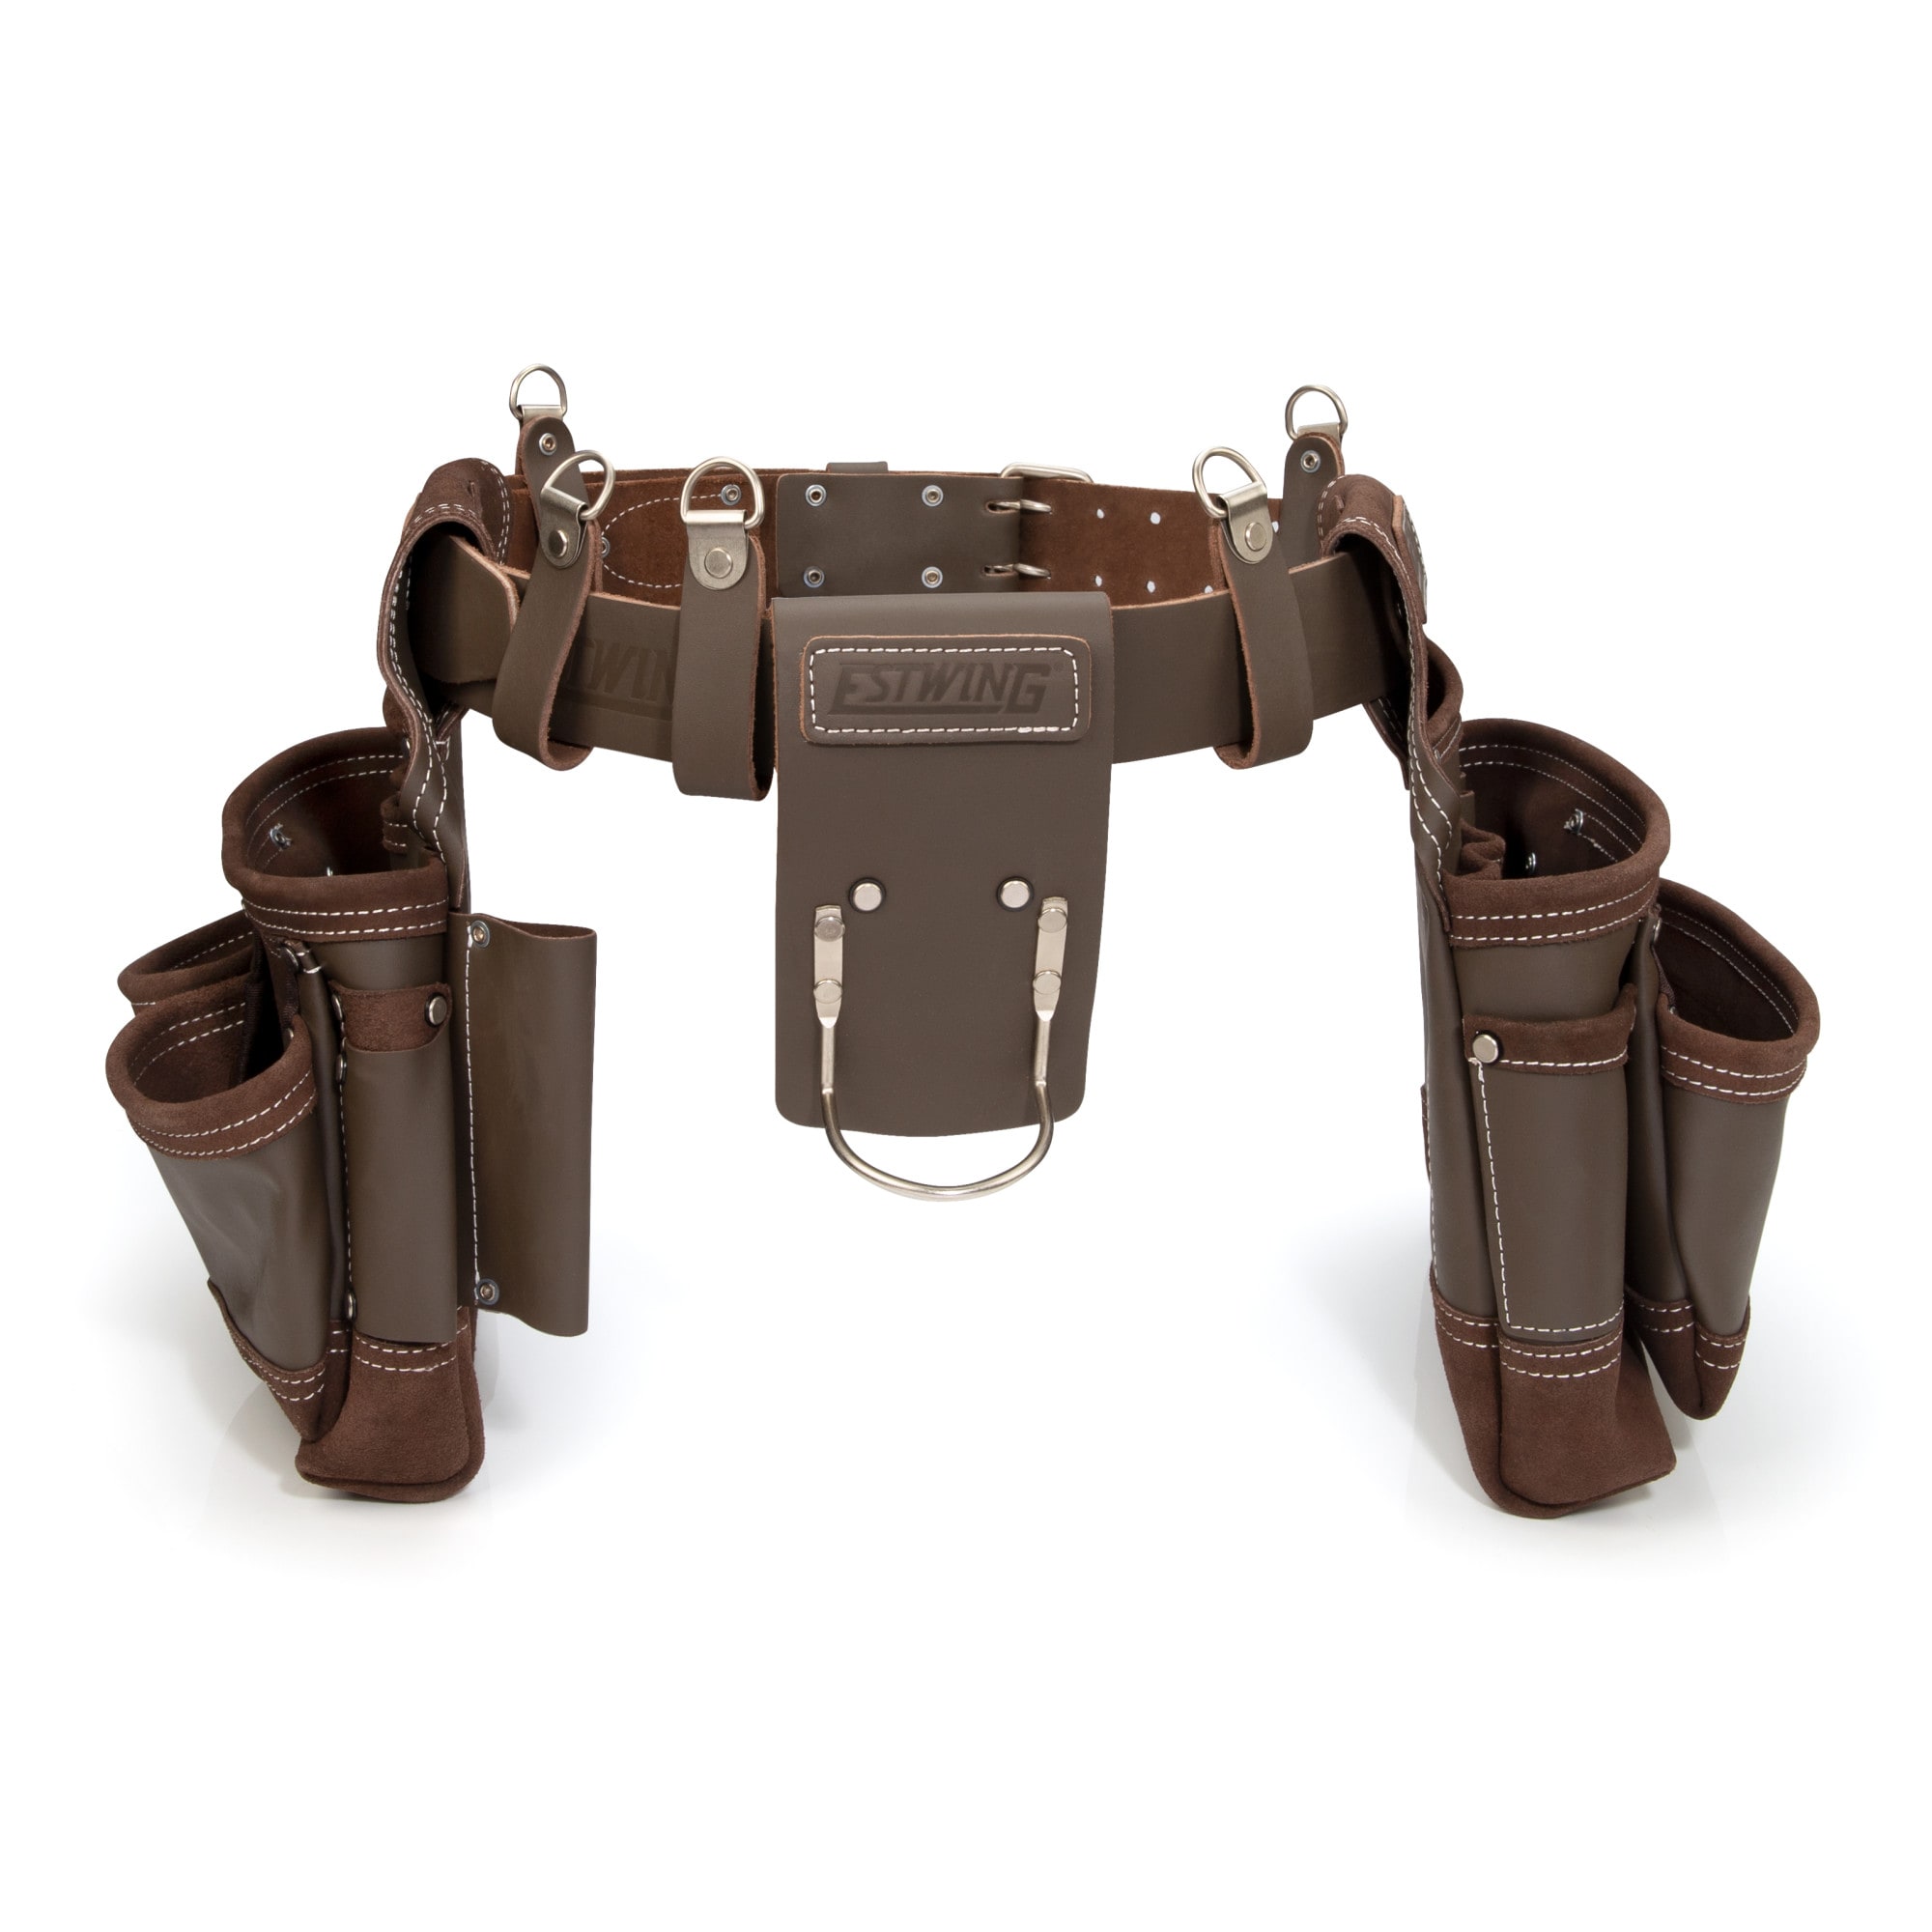 Estwing Framer Leather Tool Apron in the Tool Belts department at